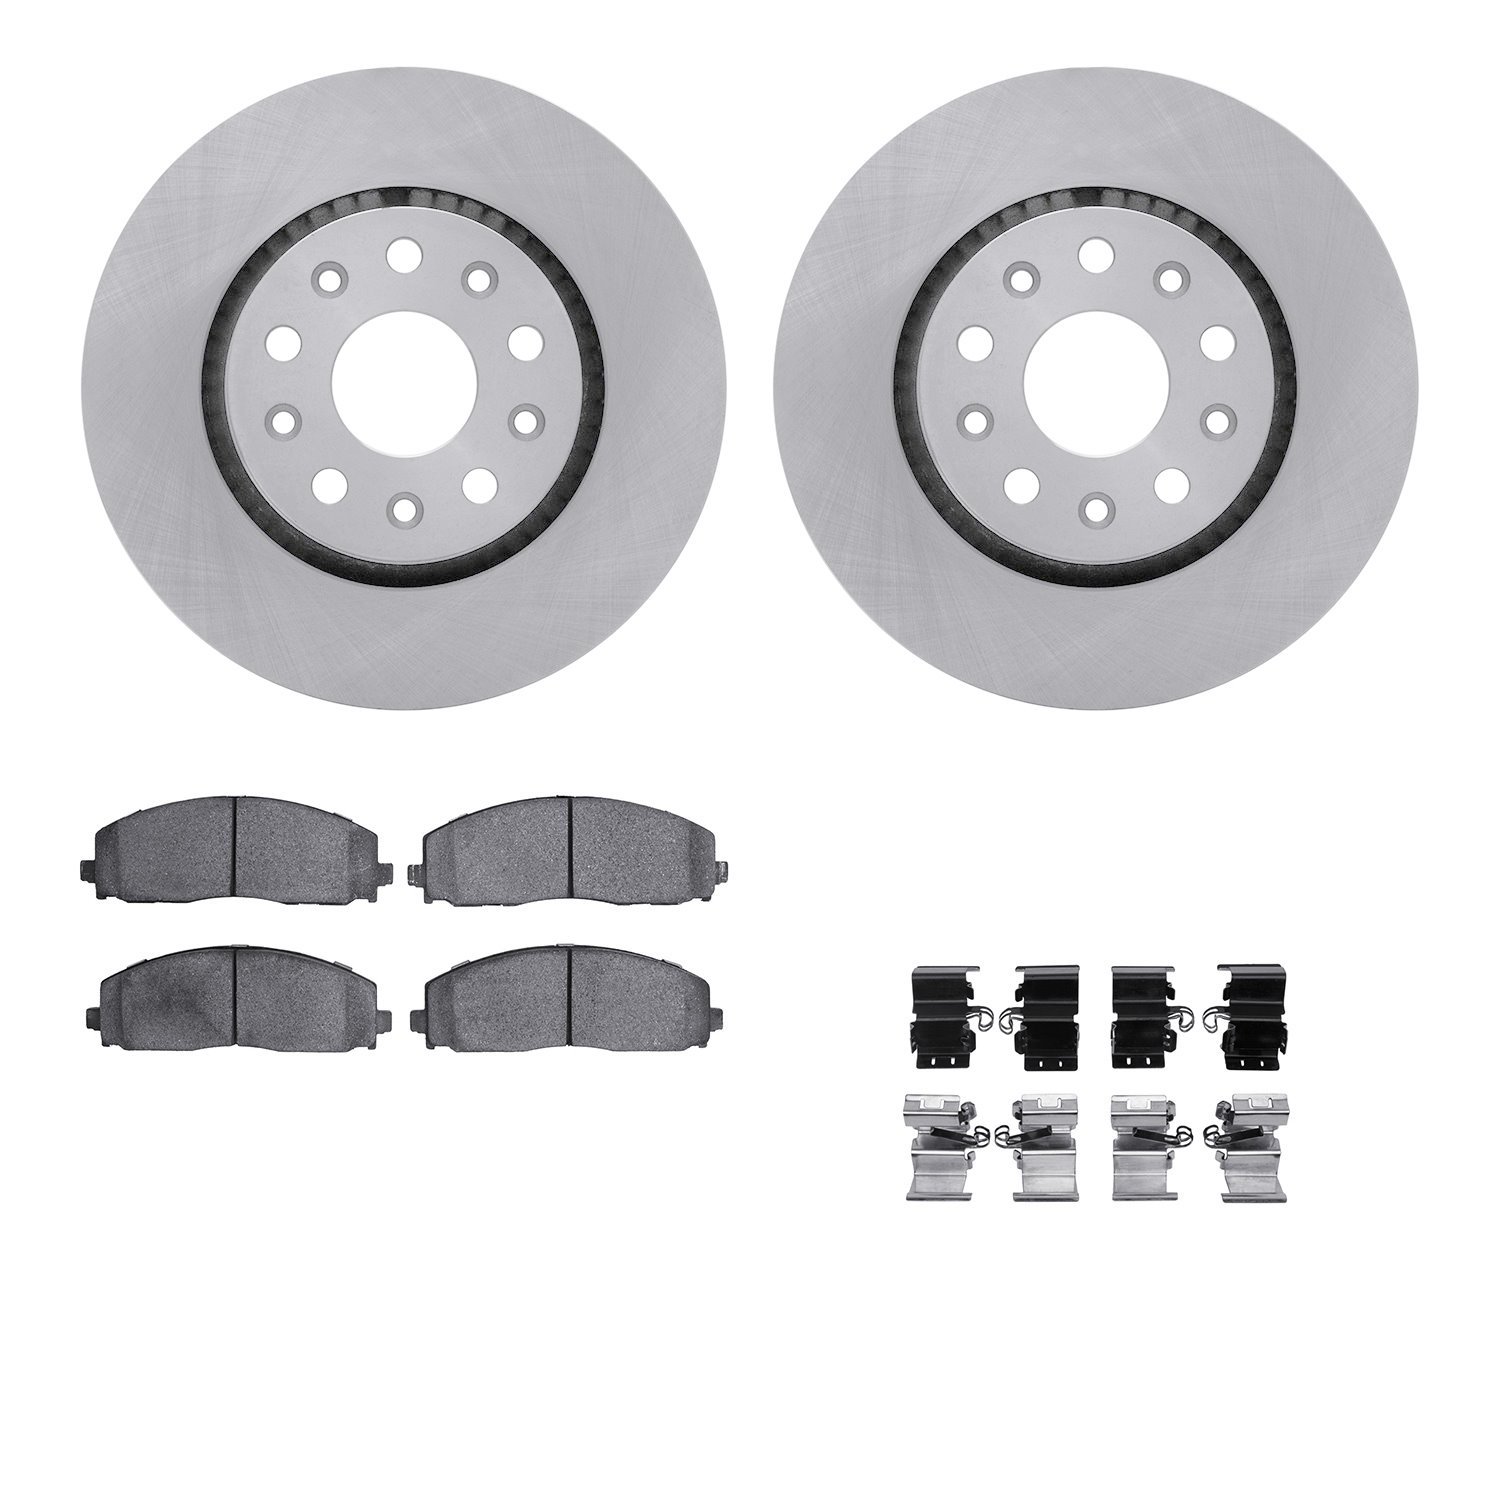 6312-42043 Brake Rotors with 3000-Series Ceramic Brake Pads Kit with Hardware, Fits Select Mopar, Position: Front